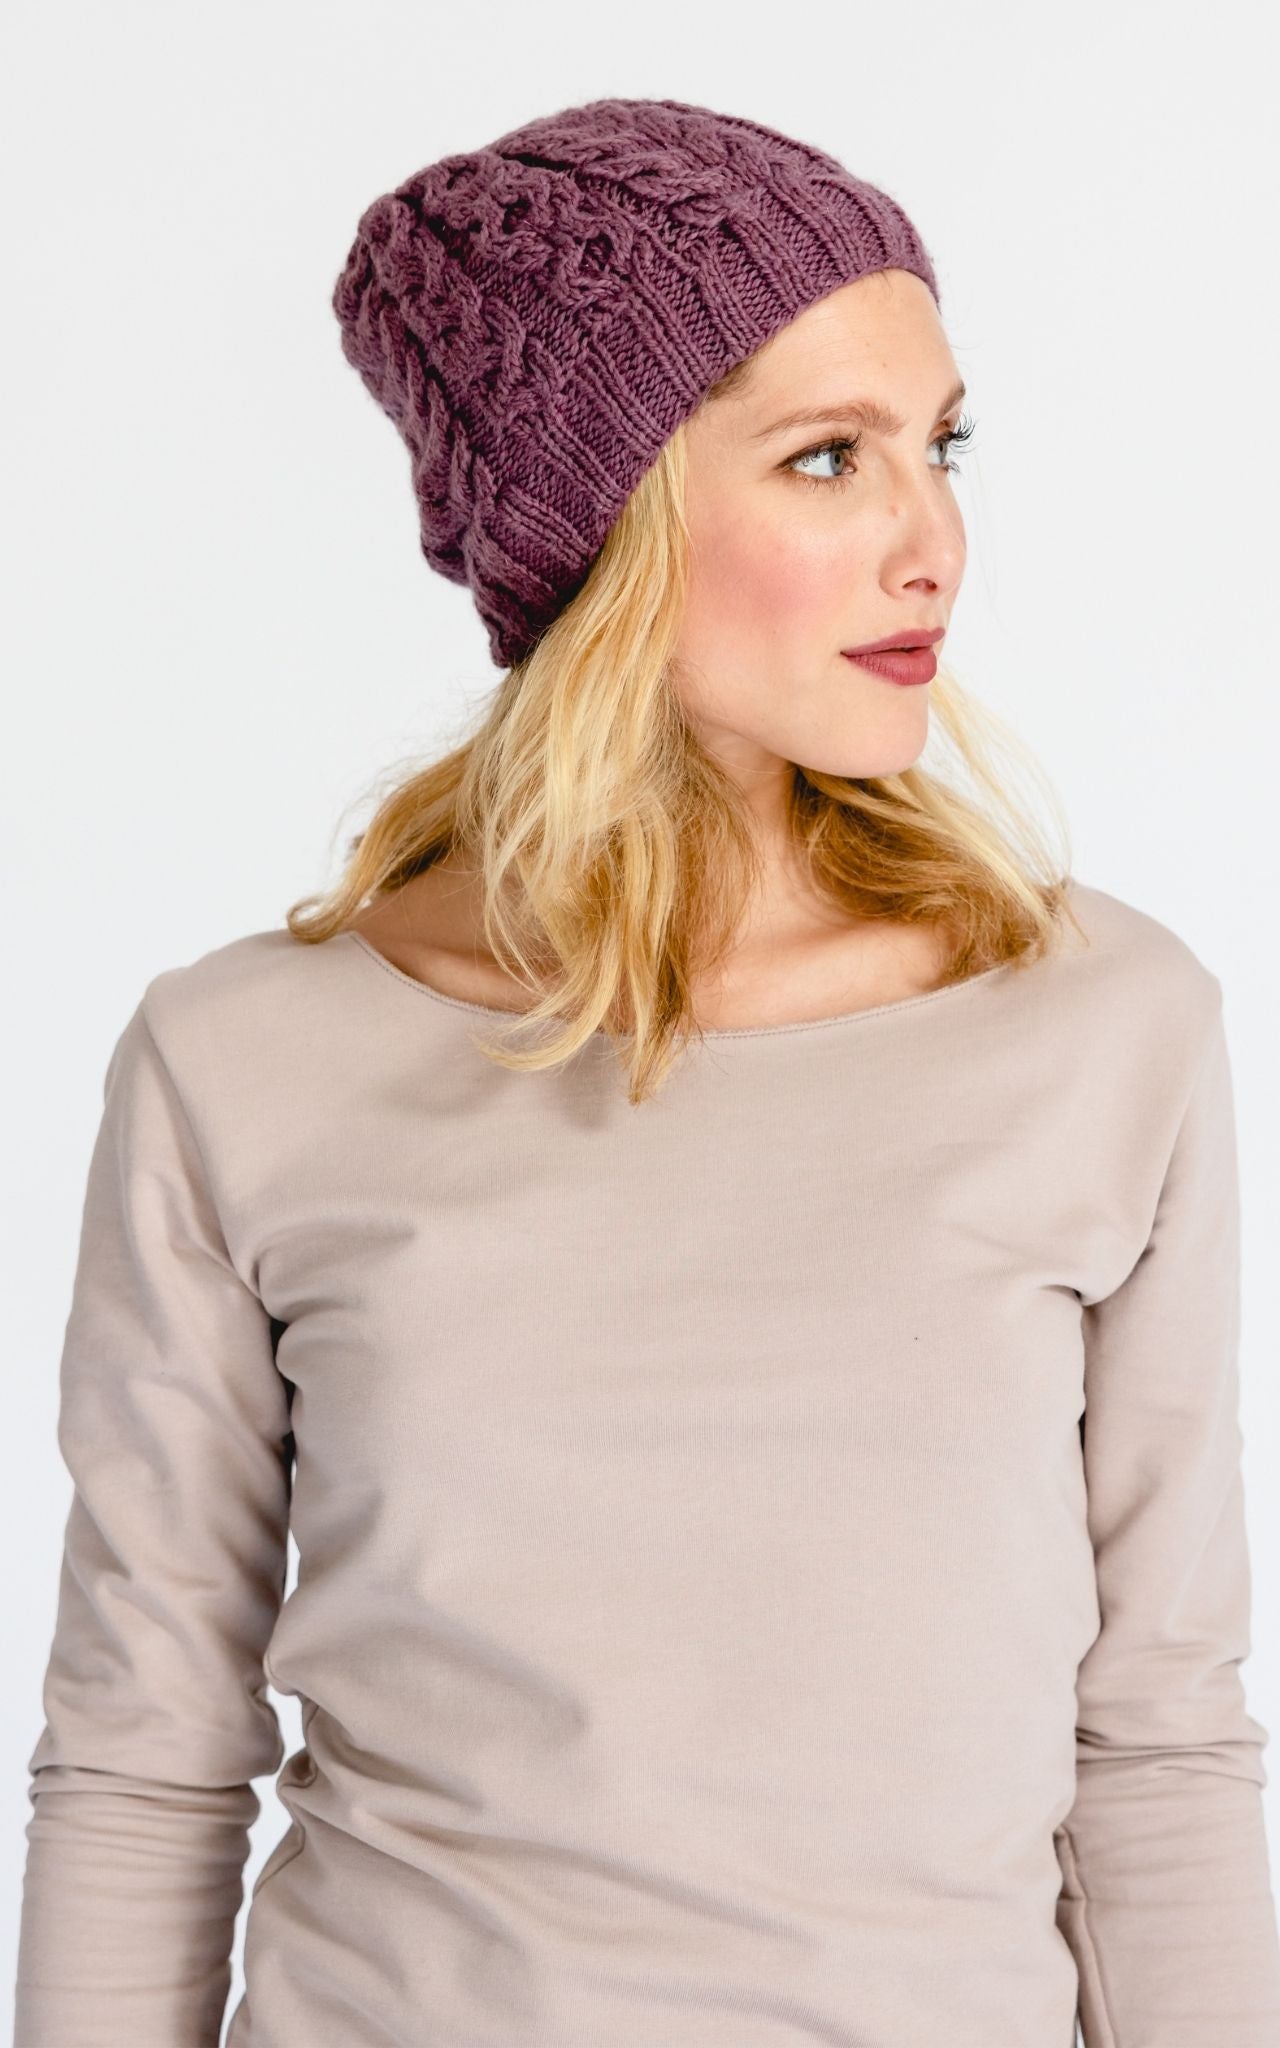 Surya Australia Ethical Cable Knit Merino Wool Beanie from Nepal - Dusty Mauve